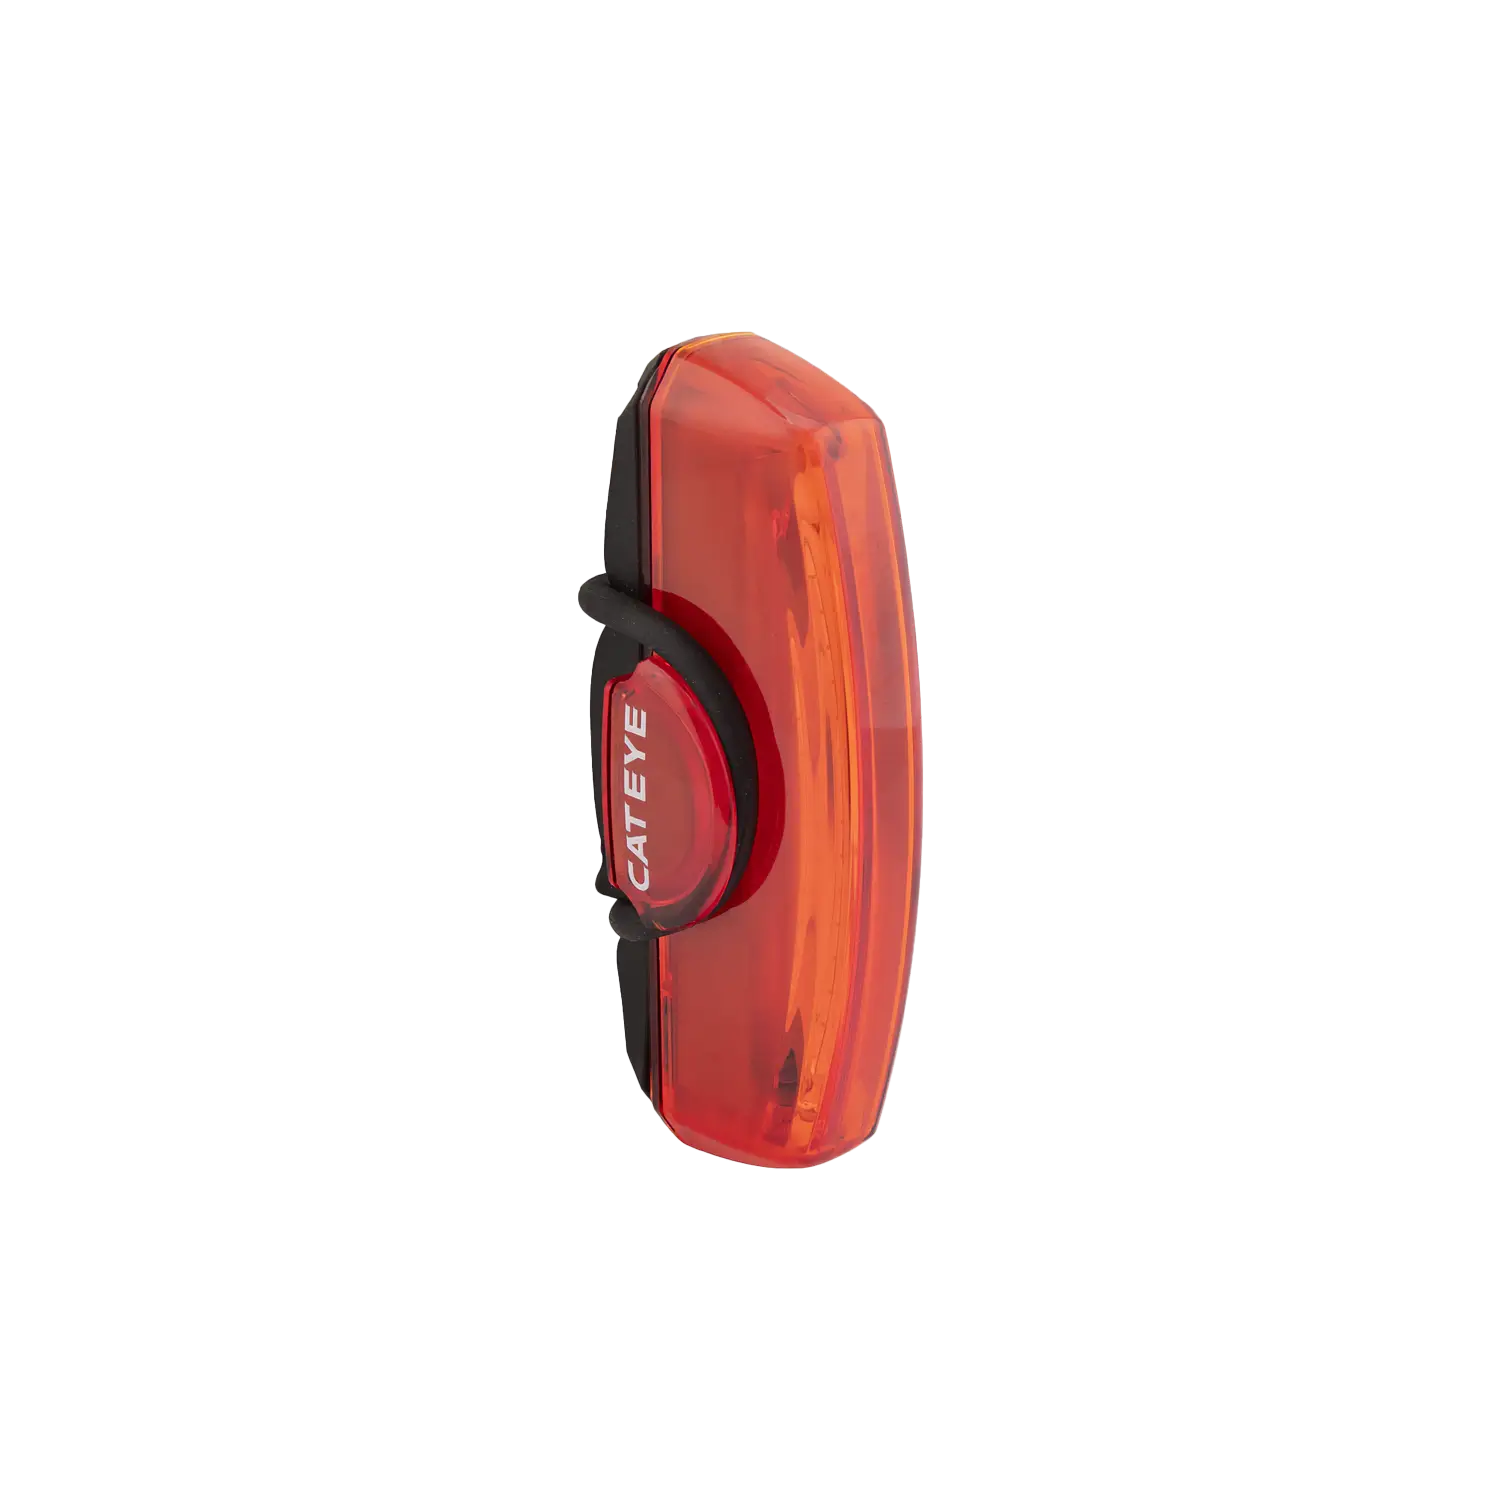 CATEYE safety light-rechargeable sale via_disabled